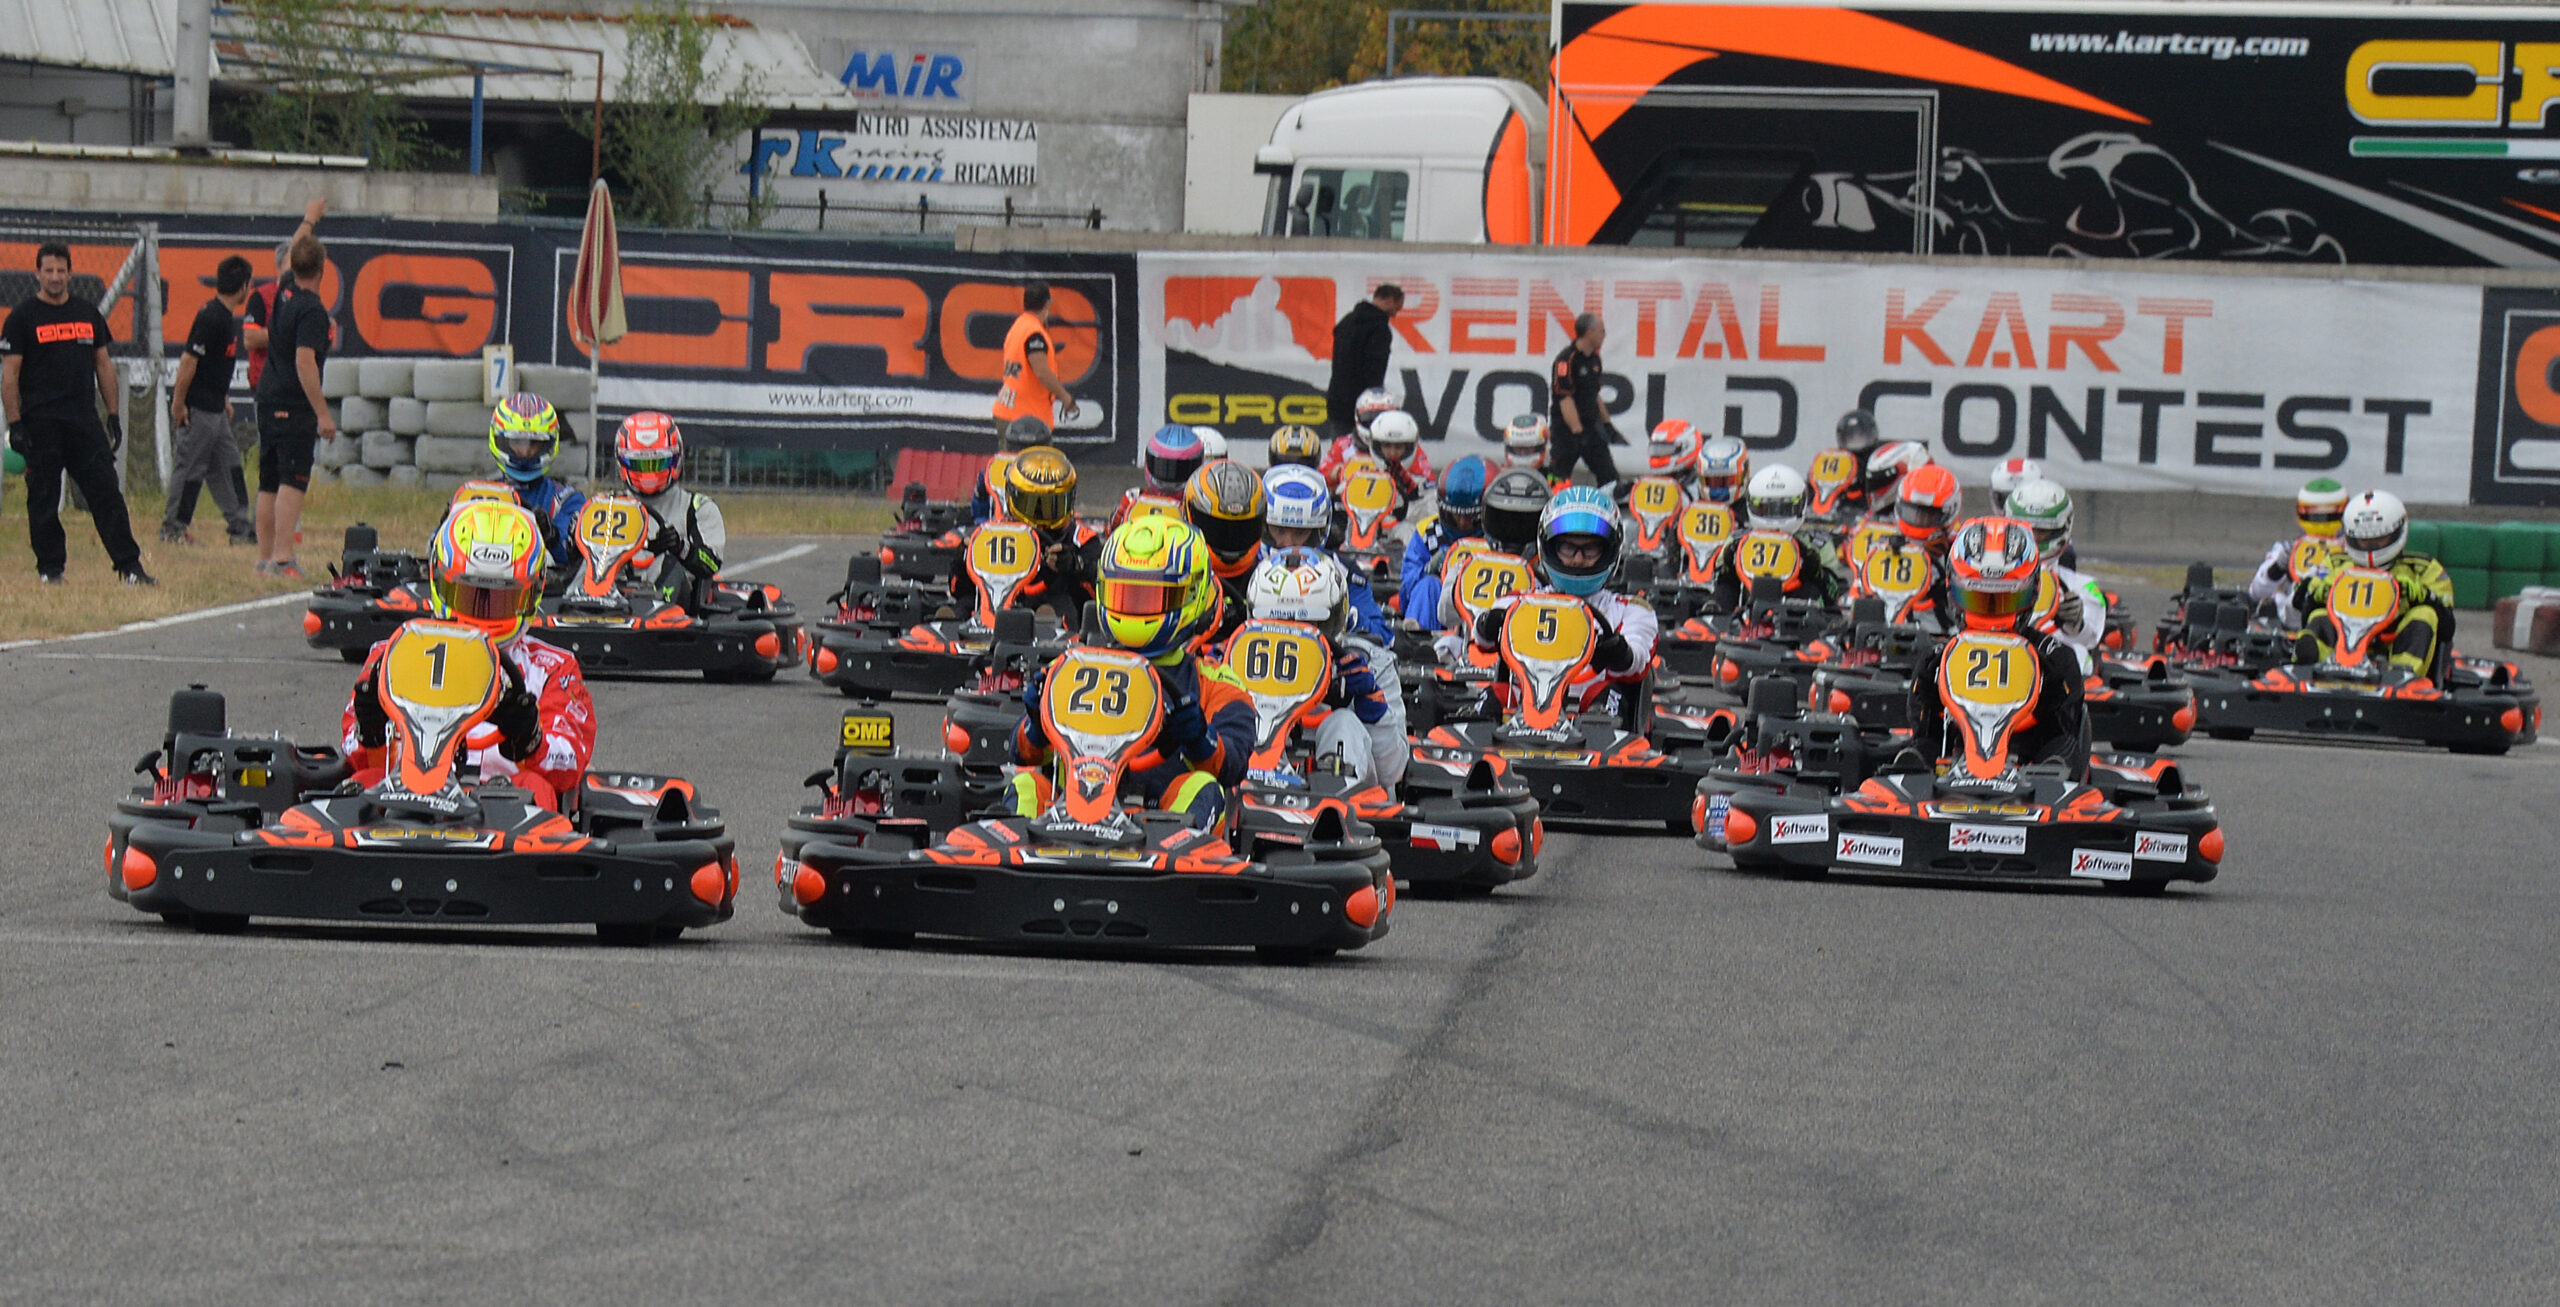 24H KARTING OF ITALY: 5 THINGS TO KNOW ACCORDING TO TEAM MANAGERS